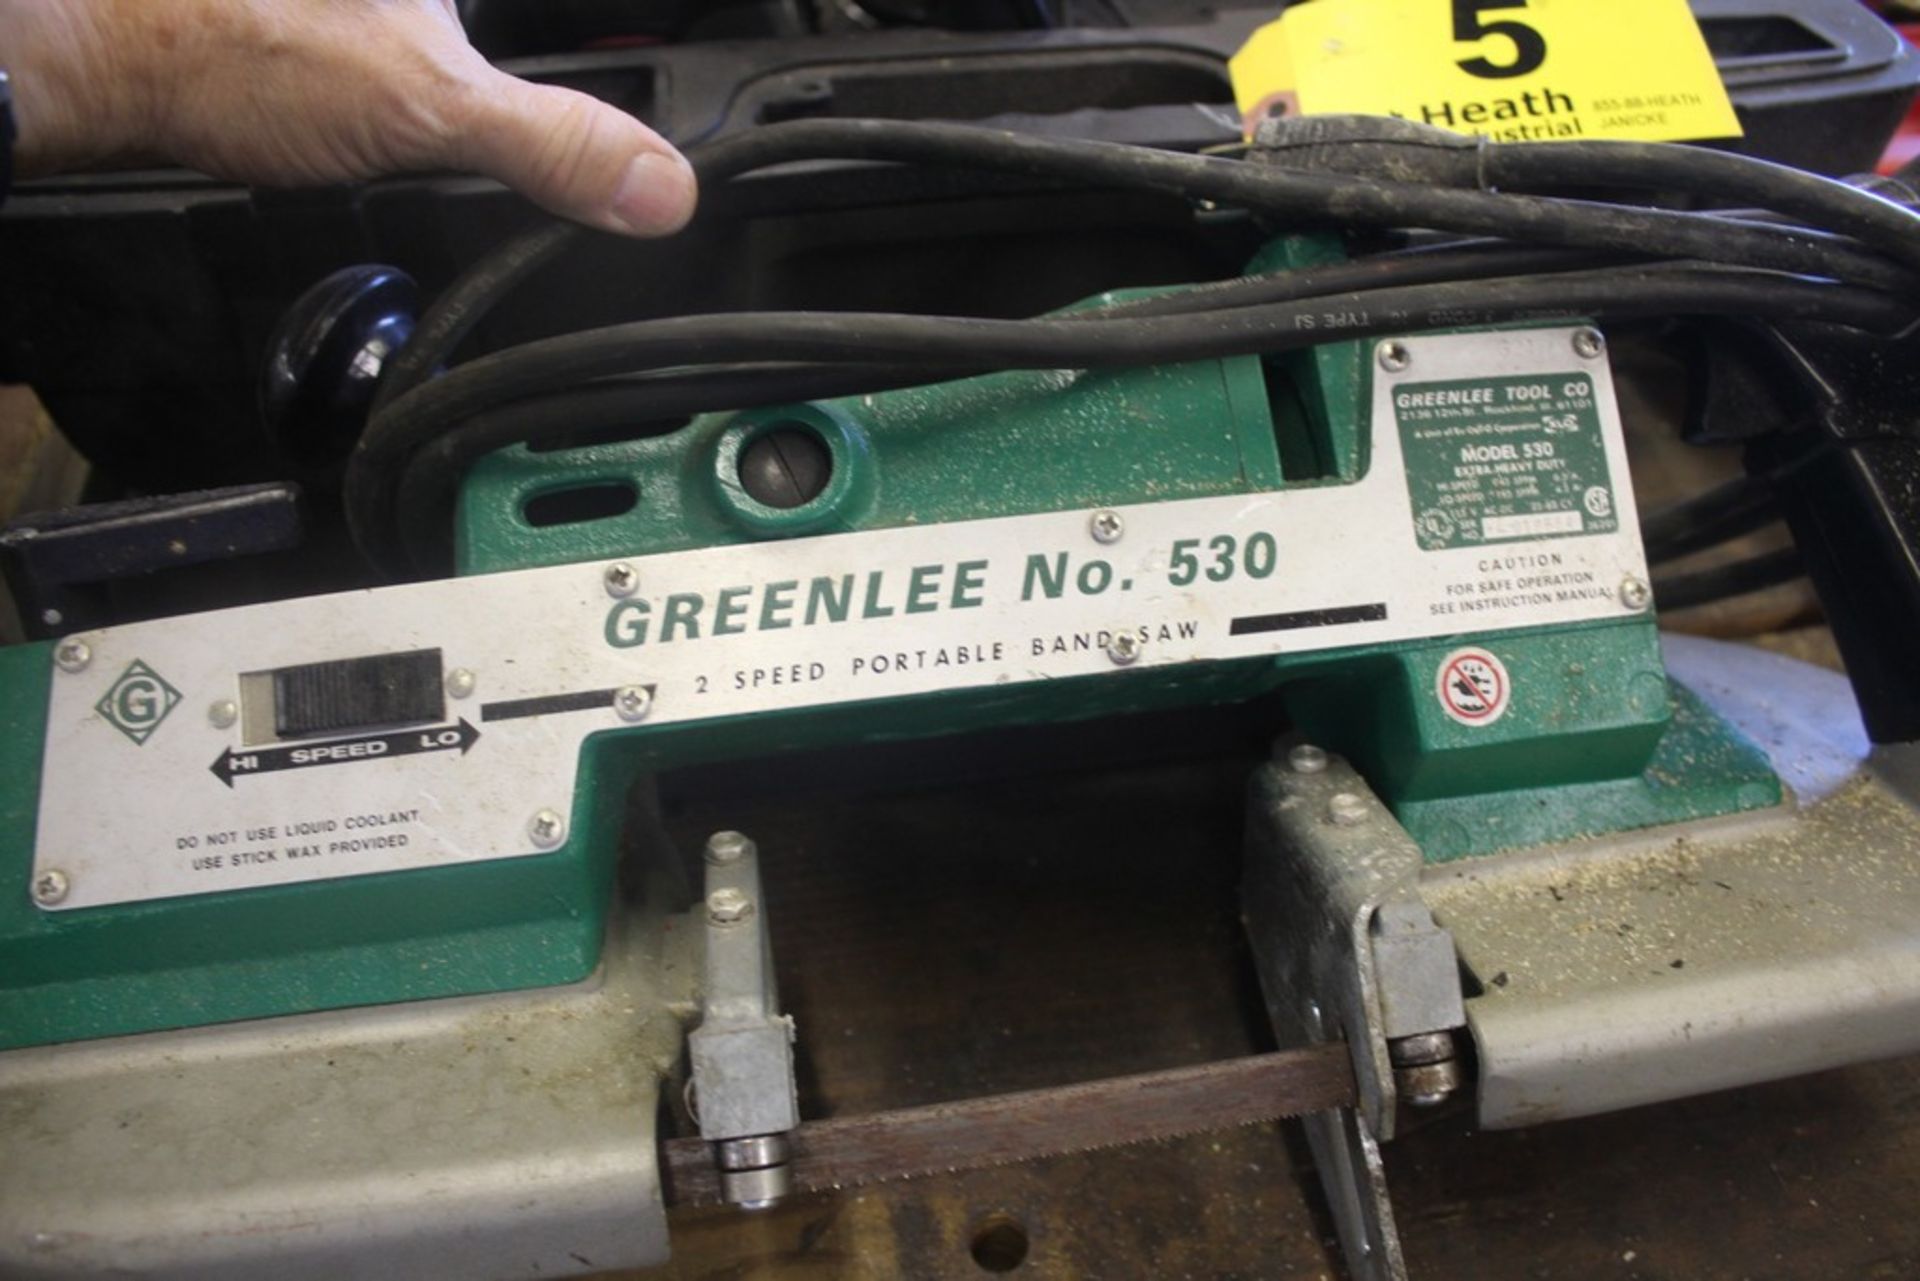 GREENLEE MODEL 530 2 SPEED PORTABLE BAND SAW - Image 2 of 2